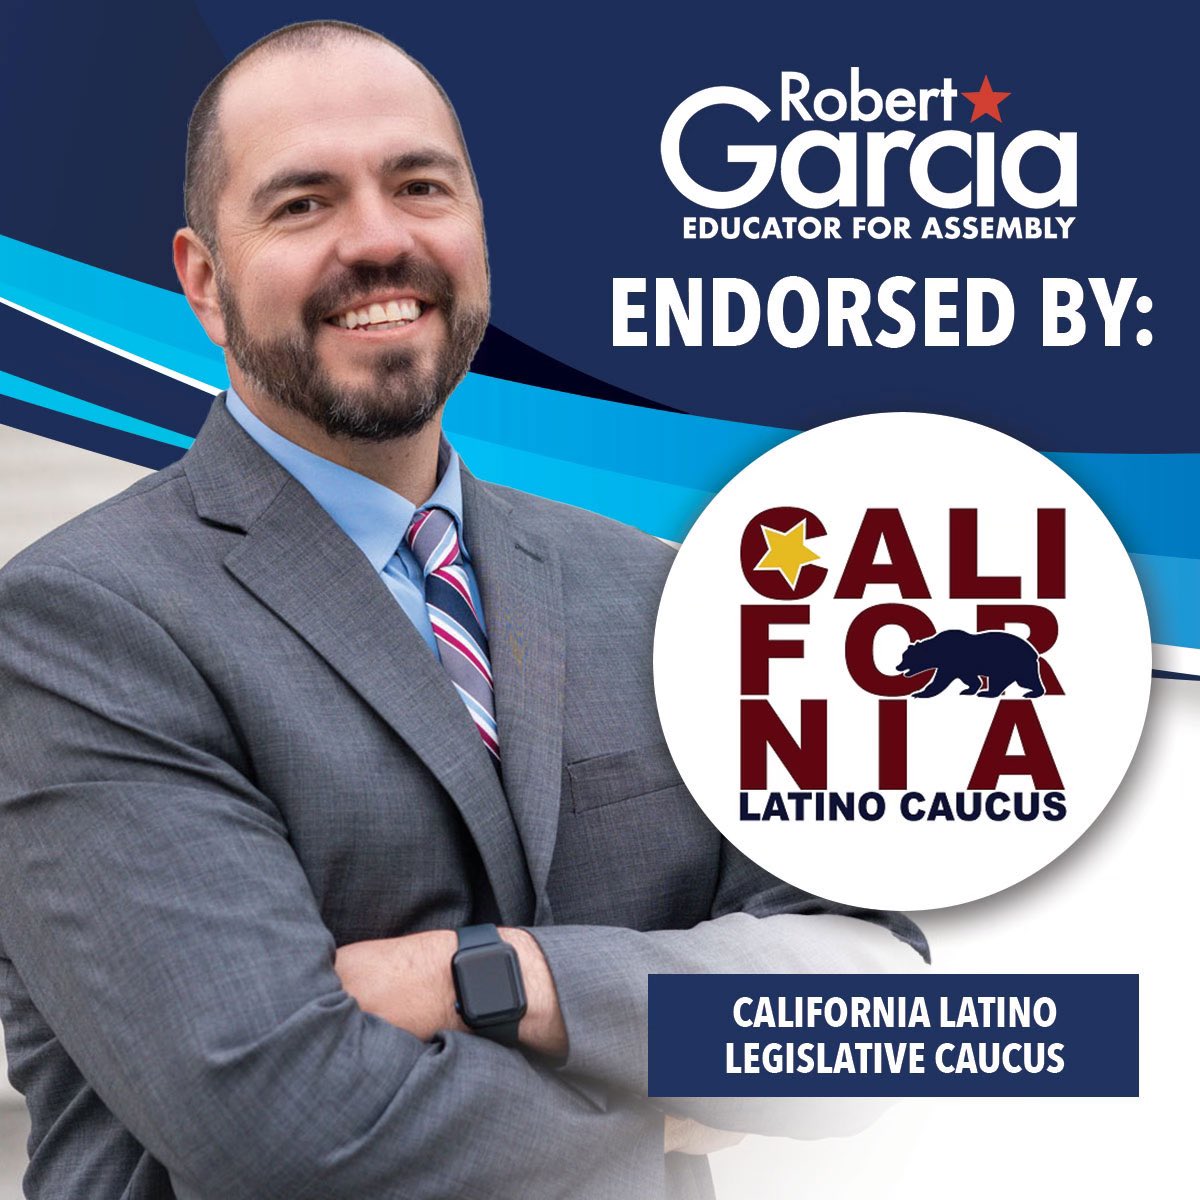 🚨 @LatinoCaucus endorses Robert Garcia for AD50 🚨
In releasing the endorsement, the body of the CLLC stated, 'The CLLC is proud to endorse Robert Garcia for AD 50. Robert Garcia has an impressive background in education and service that will truly represent the interests of 🧵